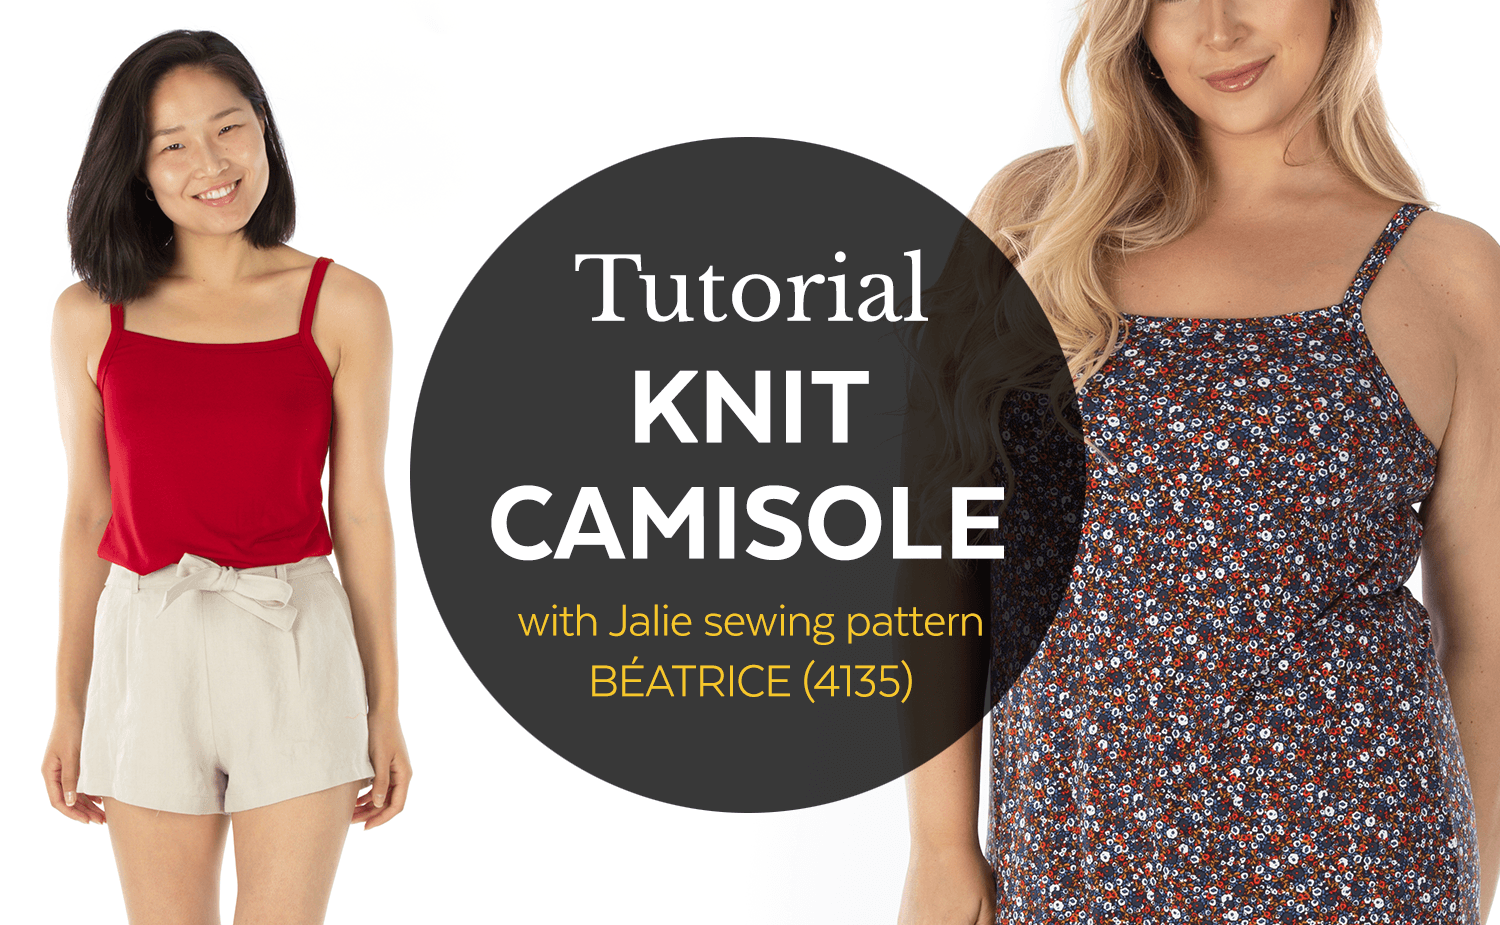 Camisole and panties - Sewing pattern Jalie 2568